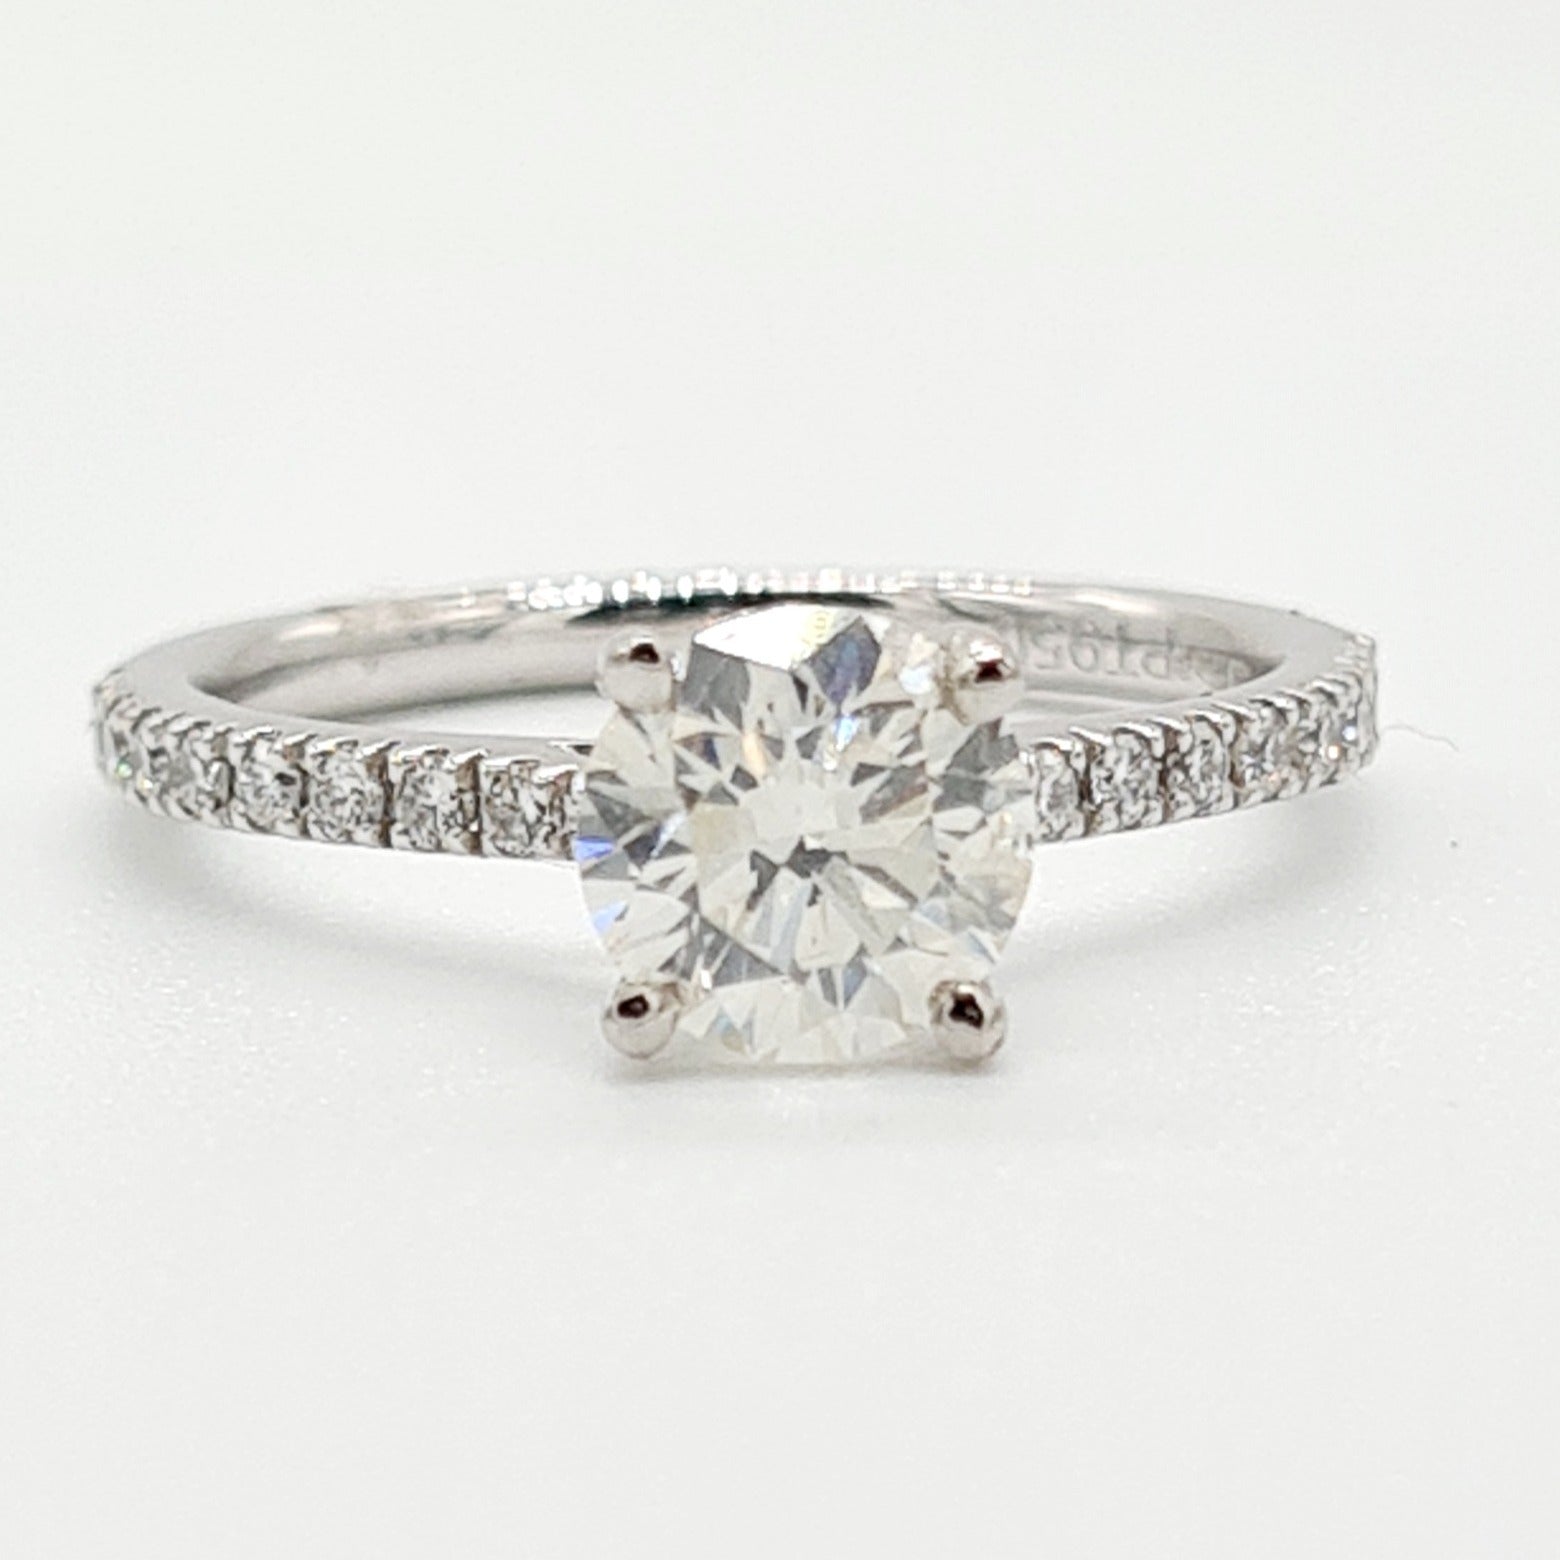 18ct White Gold Brilliant Cut Diamond Ring with Diamond Shoulders (0.86ct)